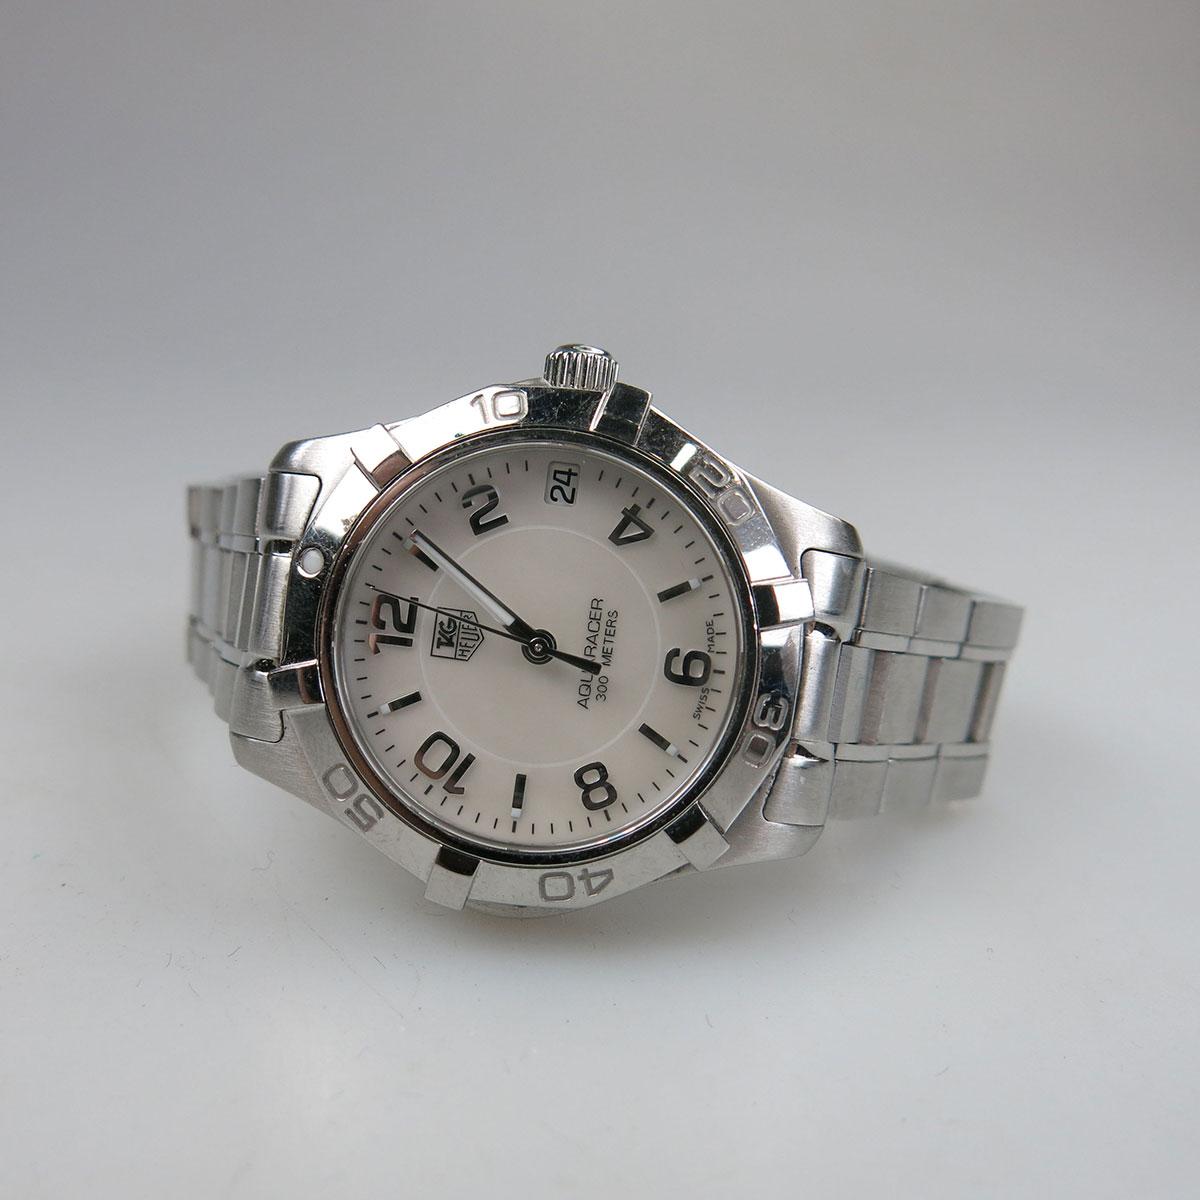 Lady’s Tag/Heuer “AquaRacer” Wristwatch With Date